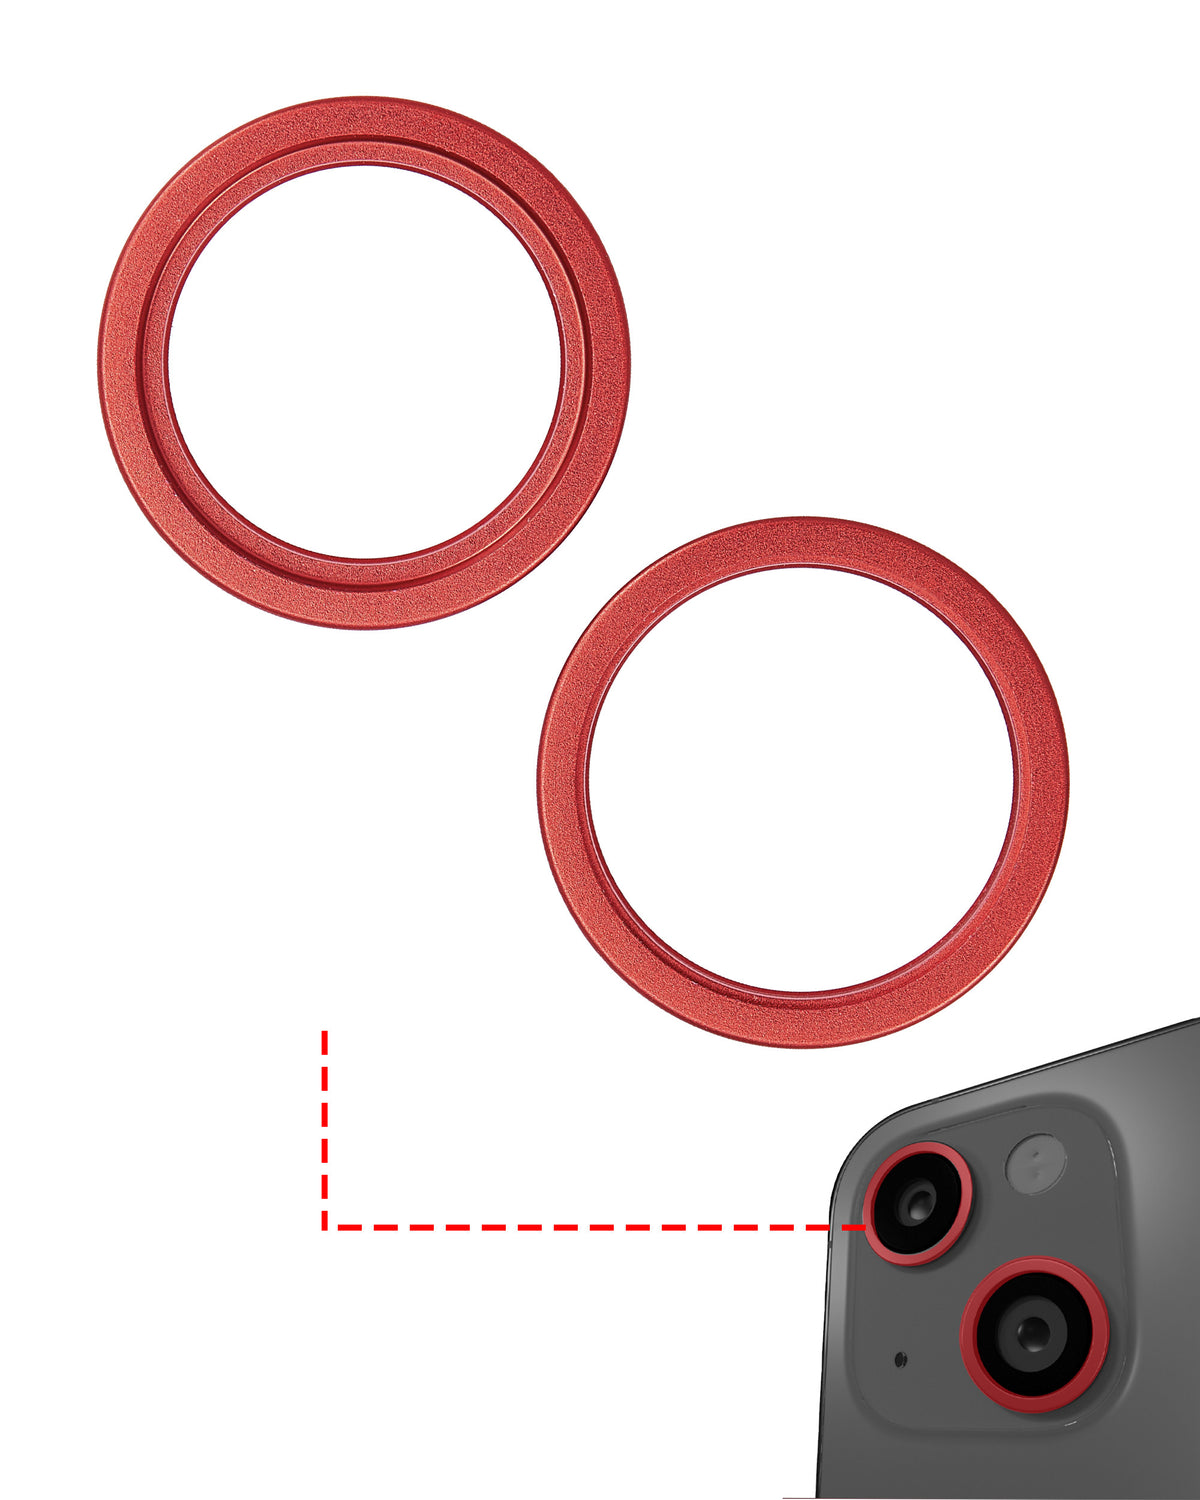 RED BACK CAMERA BEZEL RING ONLY (2 PIECE SET) COMPATIBLE FOR IPHONE 14 / 14 PLUS